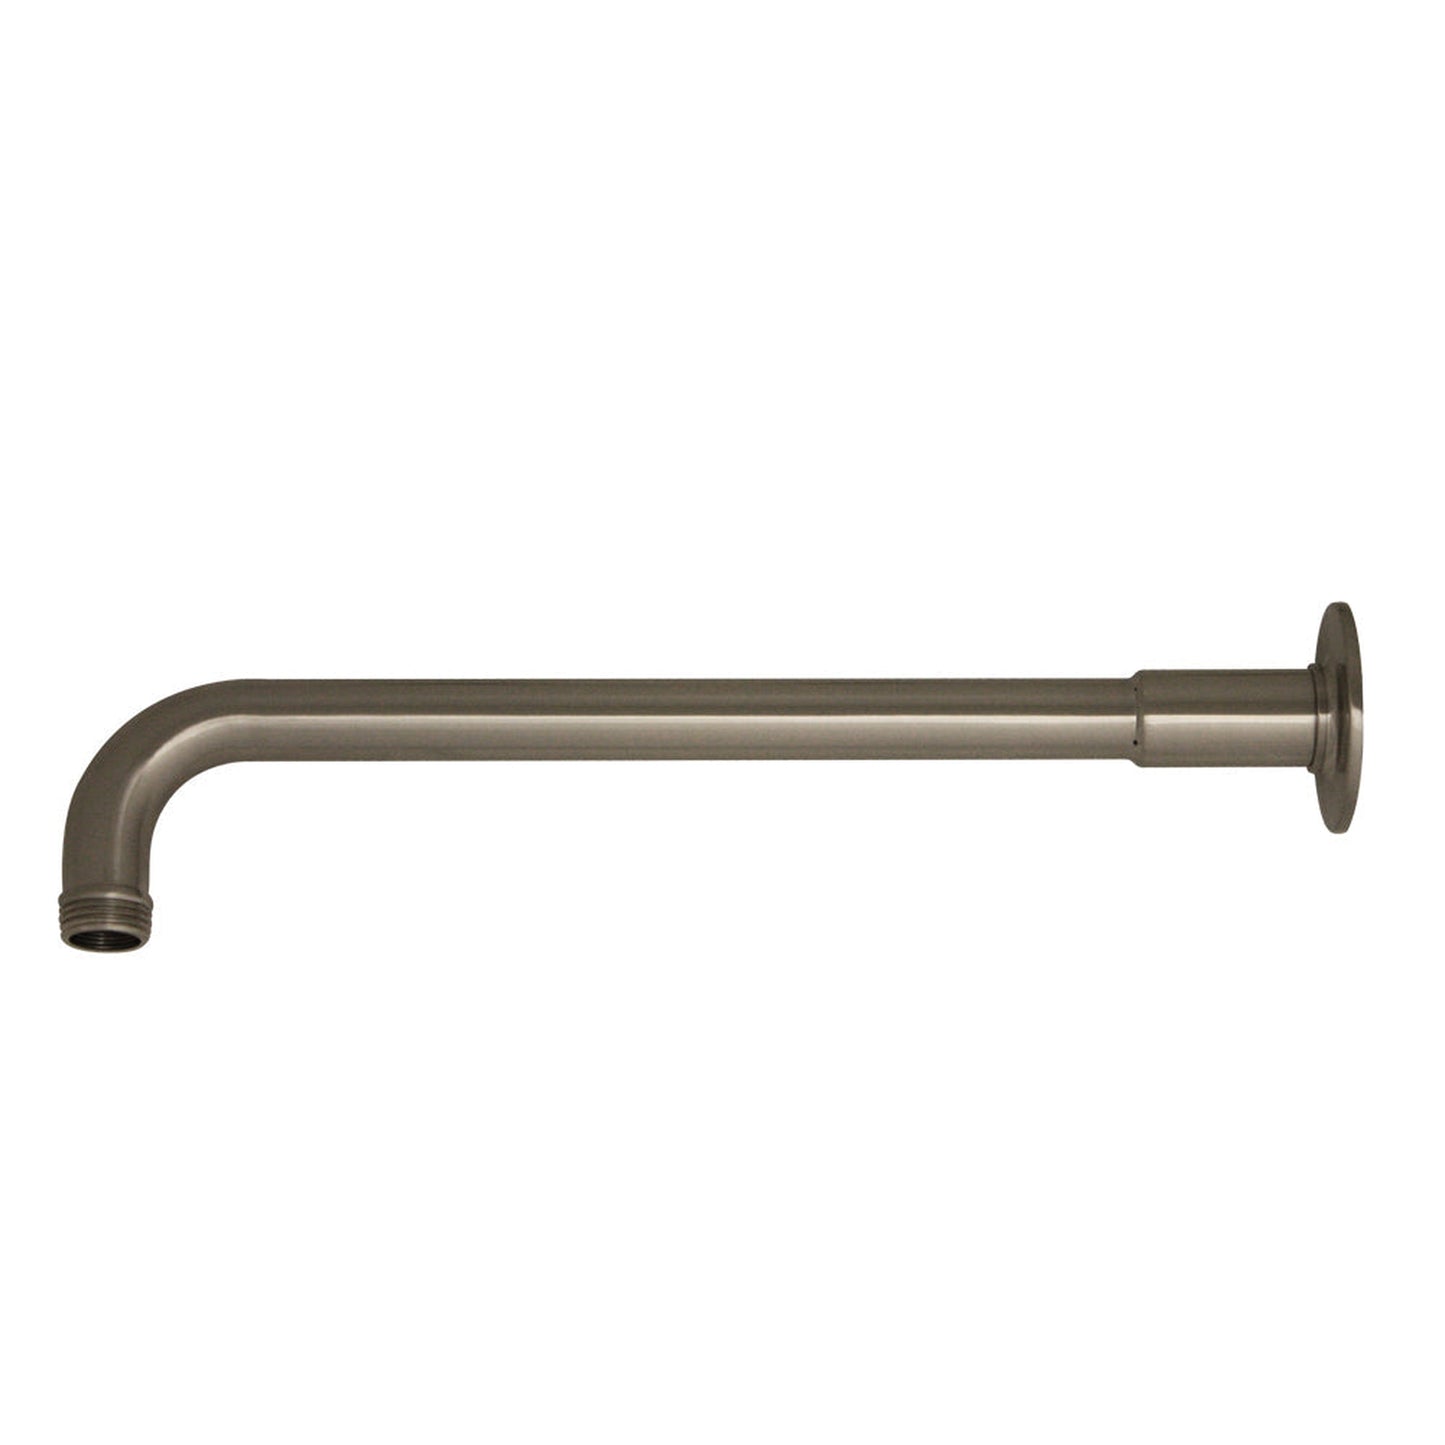 Whitehaus Showerhaus WHSA350-1-BN Brushed Nickel Solid Brass One-Piece Shower Arm With Decorative Faux Sleeve